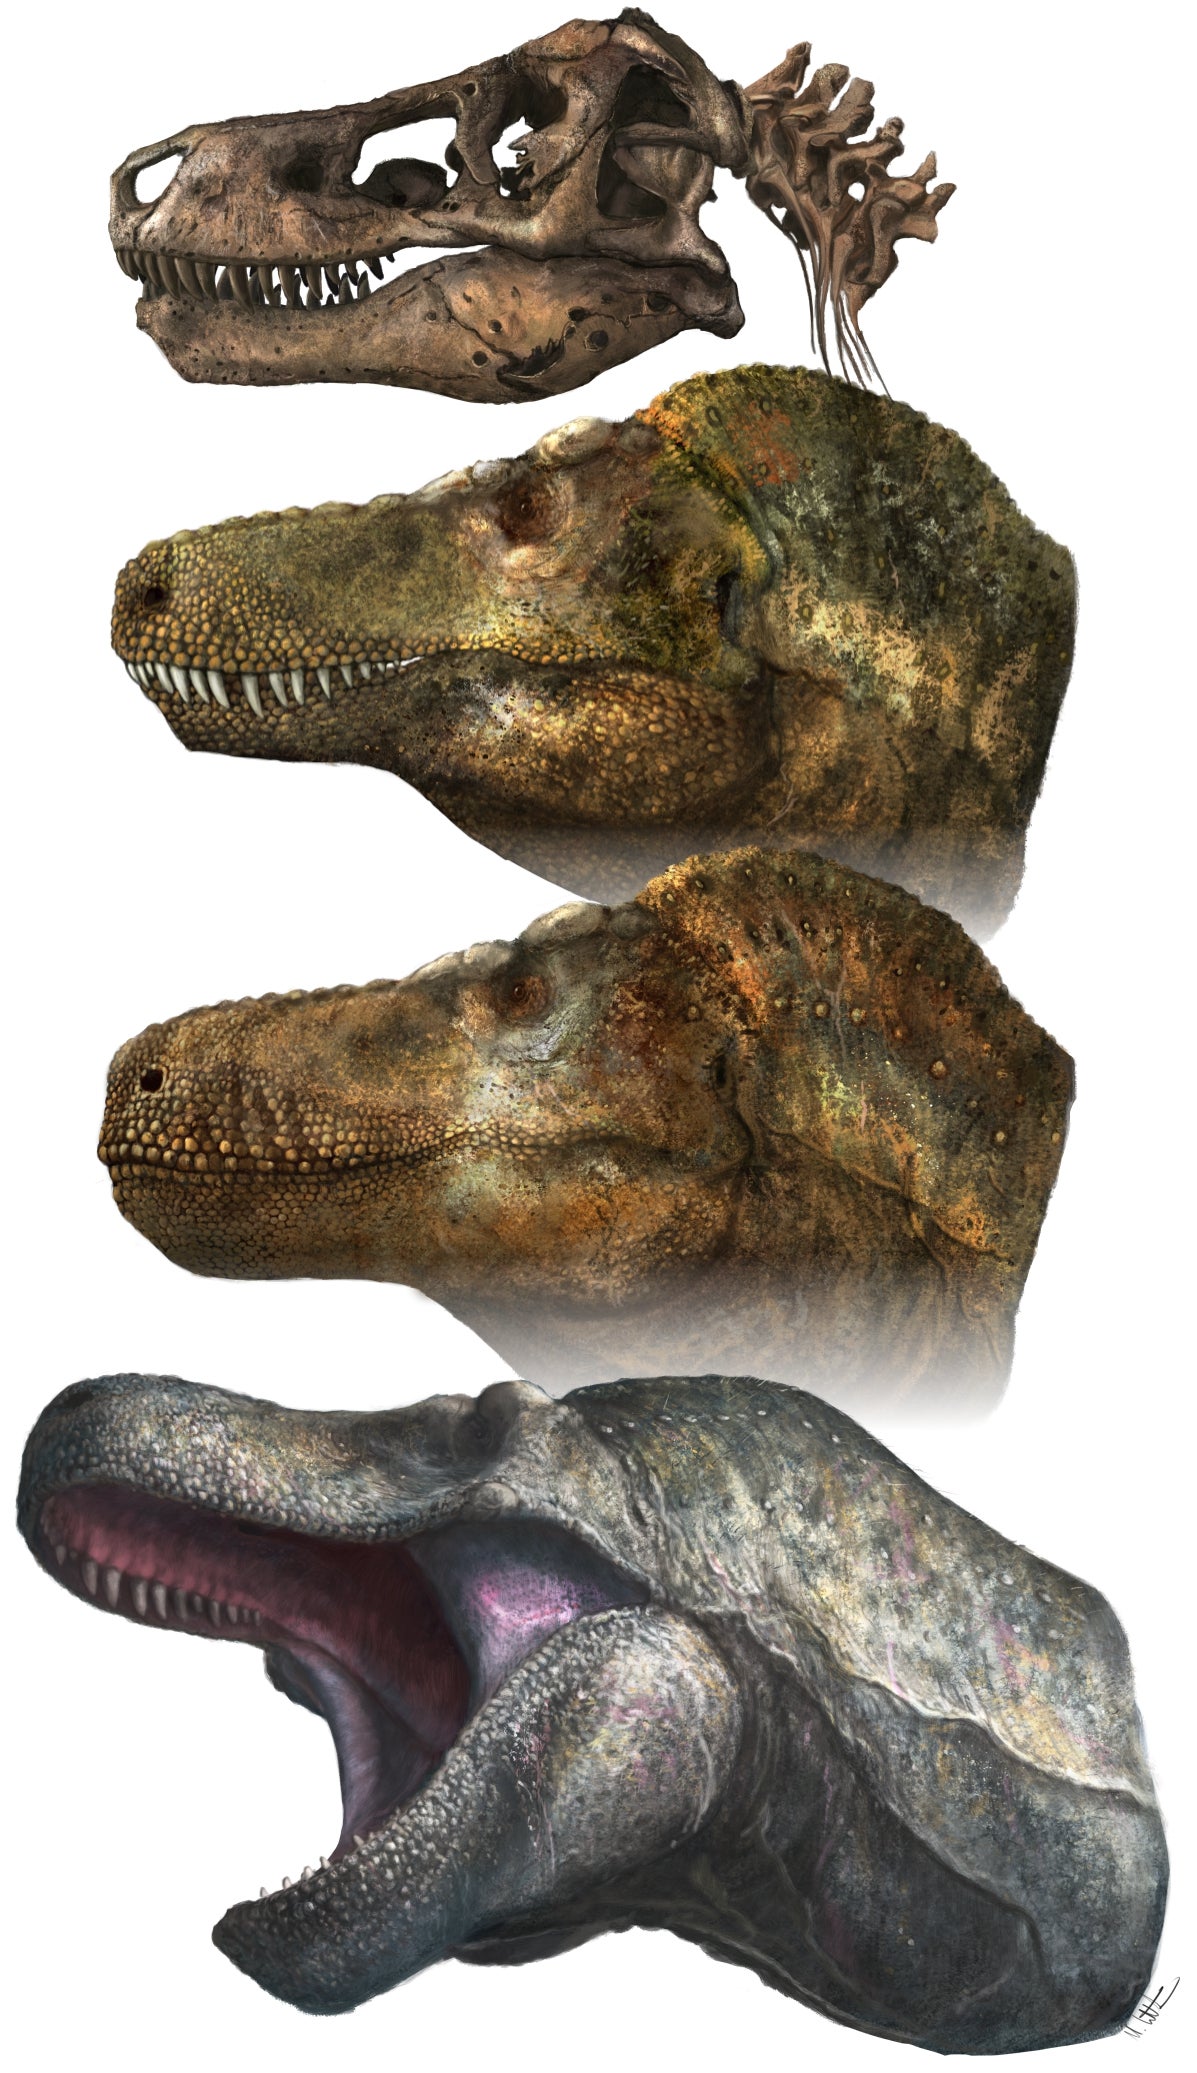 A T. rex skull and reconstructions of the animal's head, with labial scales. (Illustration: Mark P. Witton)